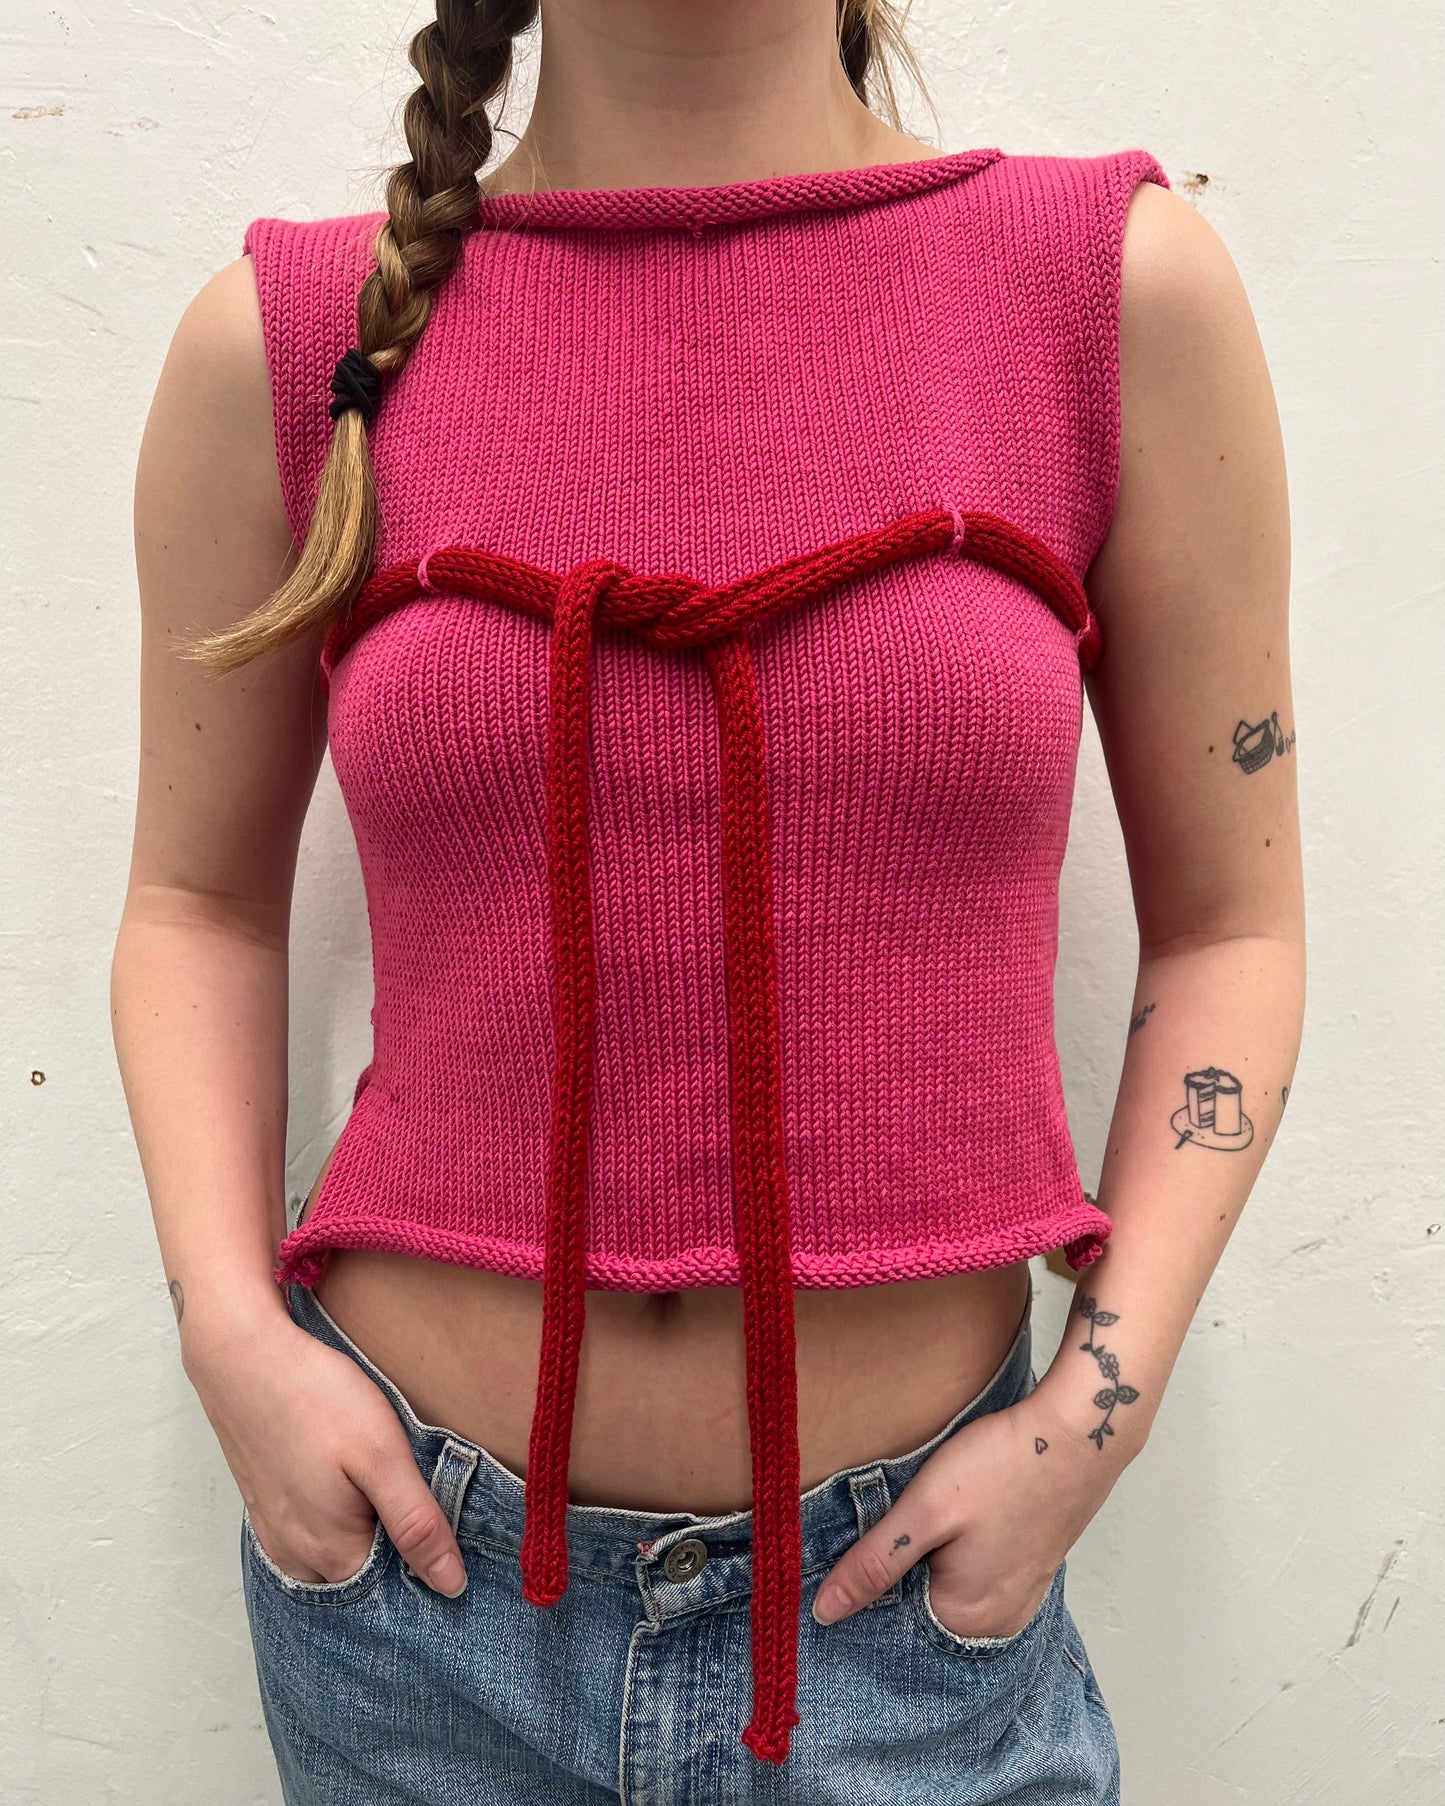 Work Wife Top - Hot Pink/Red